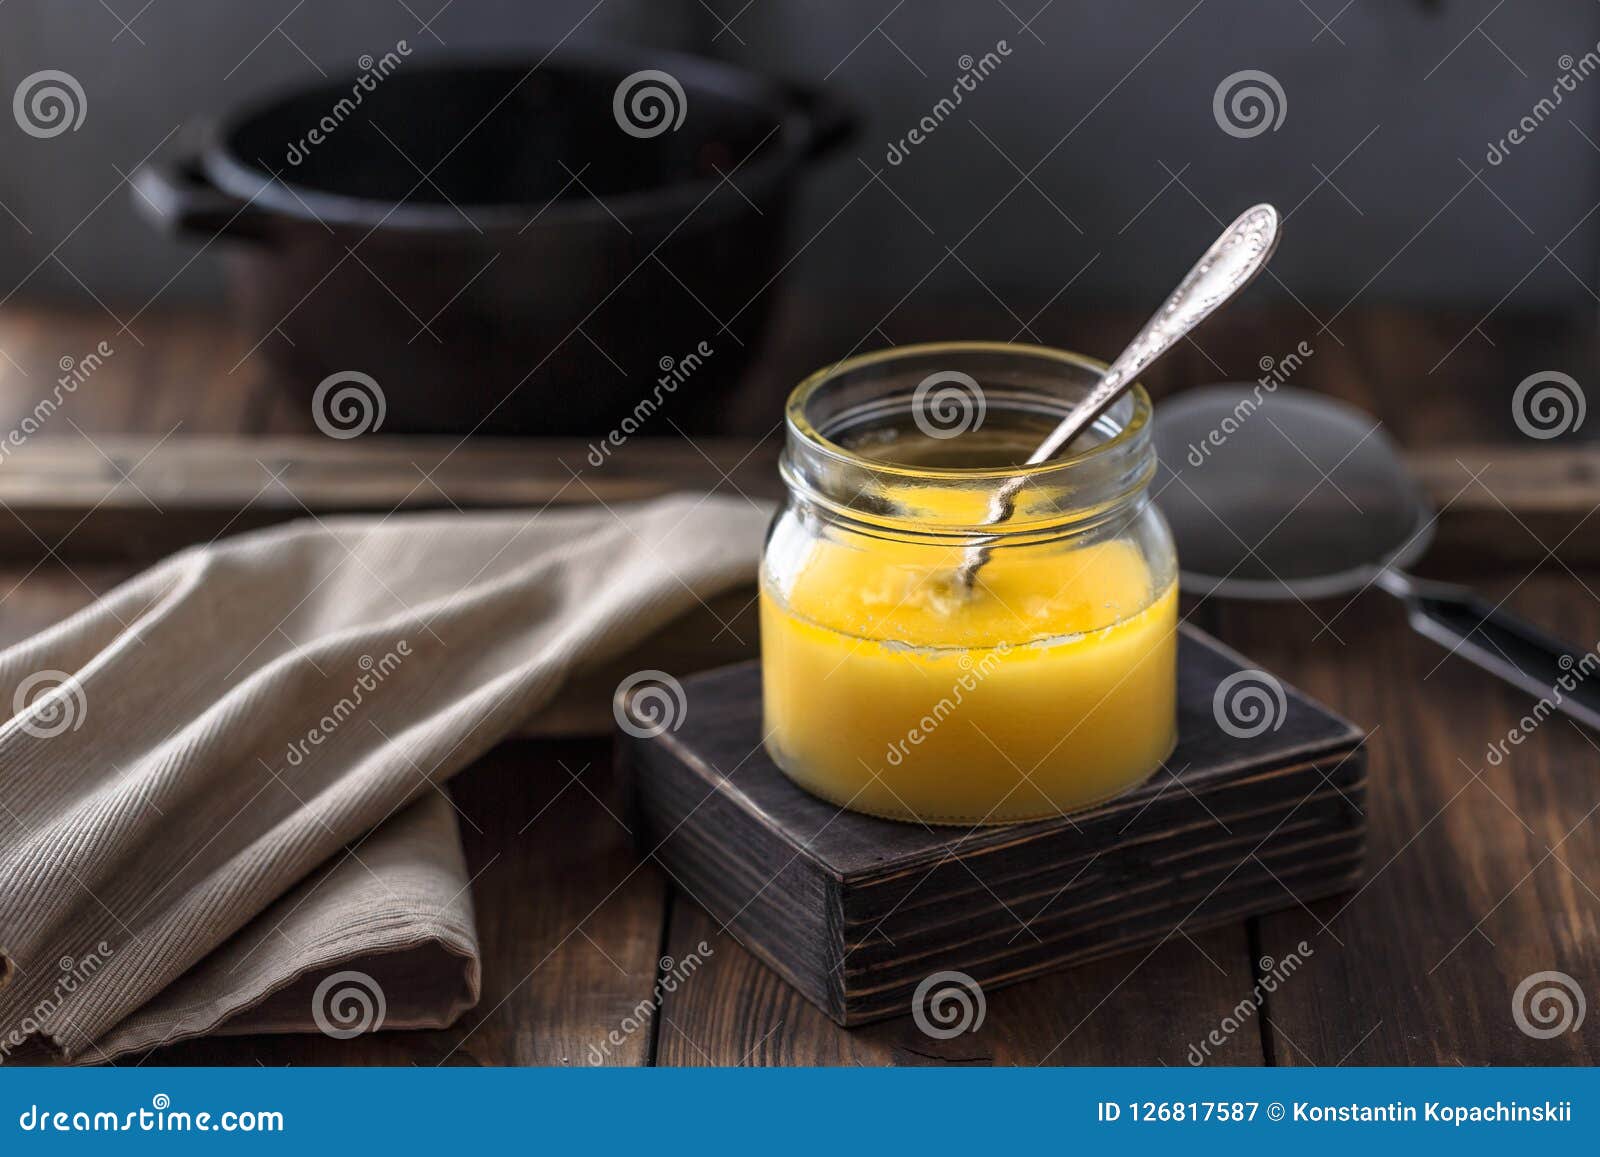 Download Ghee Or Clarified Butter In A Jar Stock Image Image Of Container Brass 126817587 Yellowimages Mockups